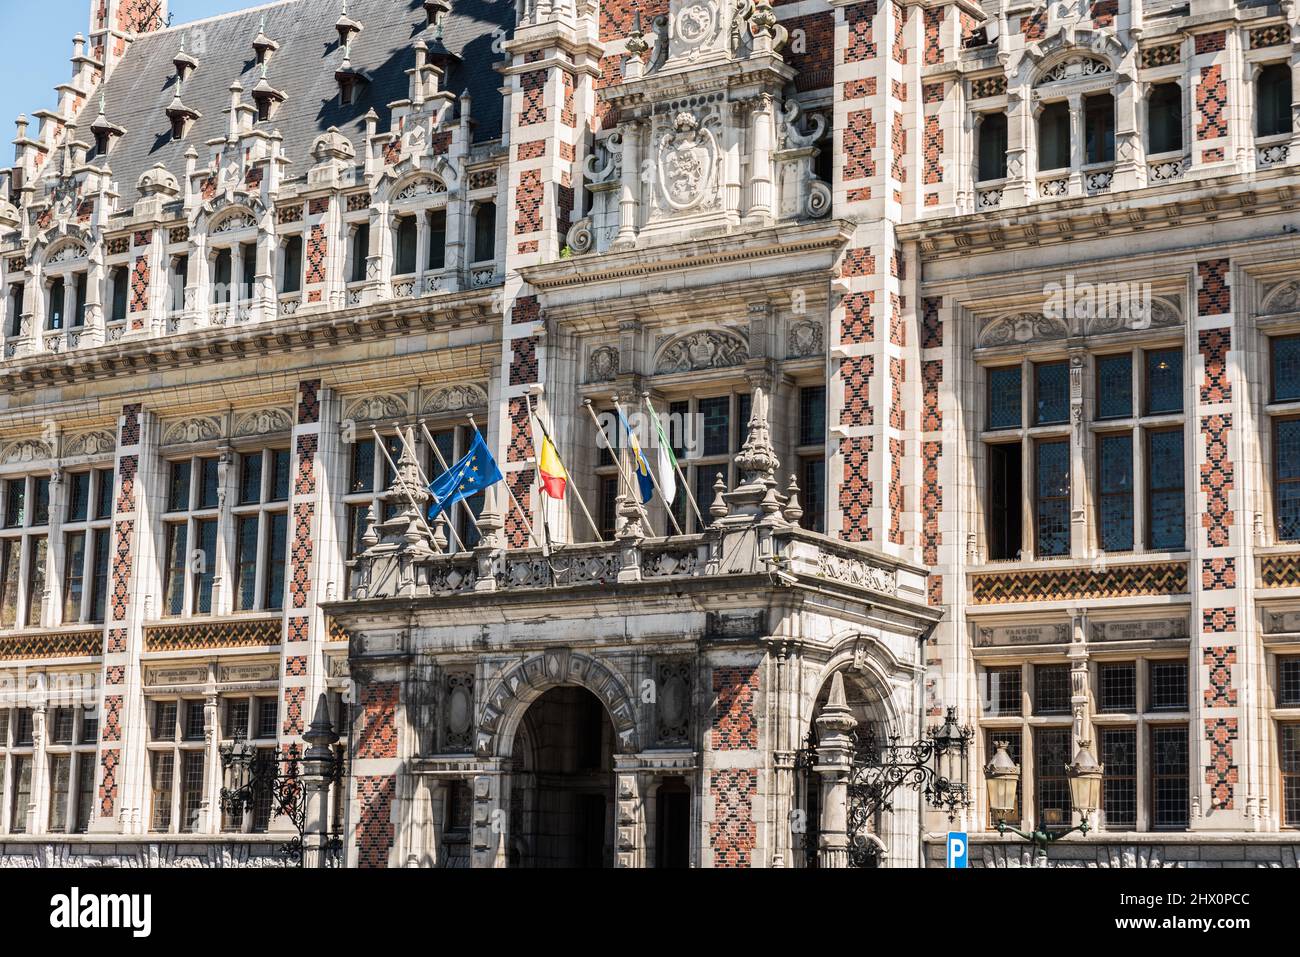 Schaerbeek, Brussels, Belgium - 06 29 2019 - The facade of the town hall in Neo- renaissance style Stock Photo